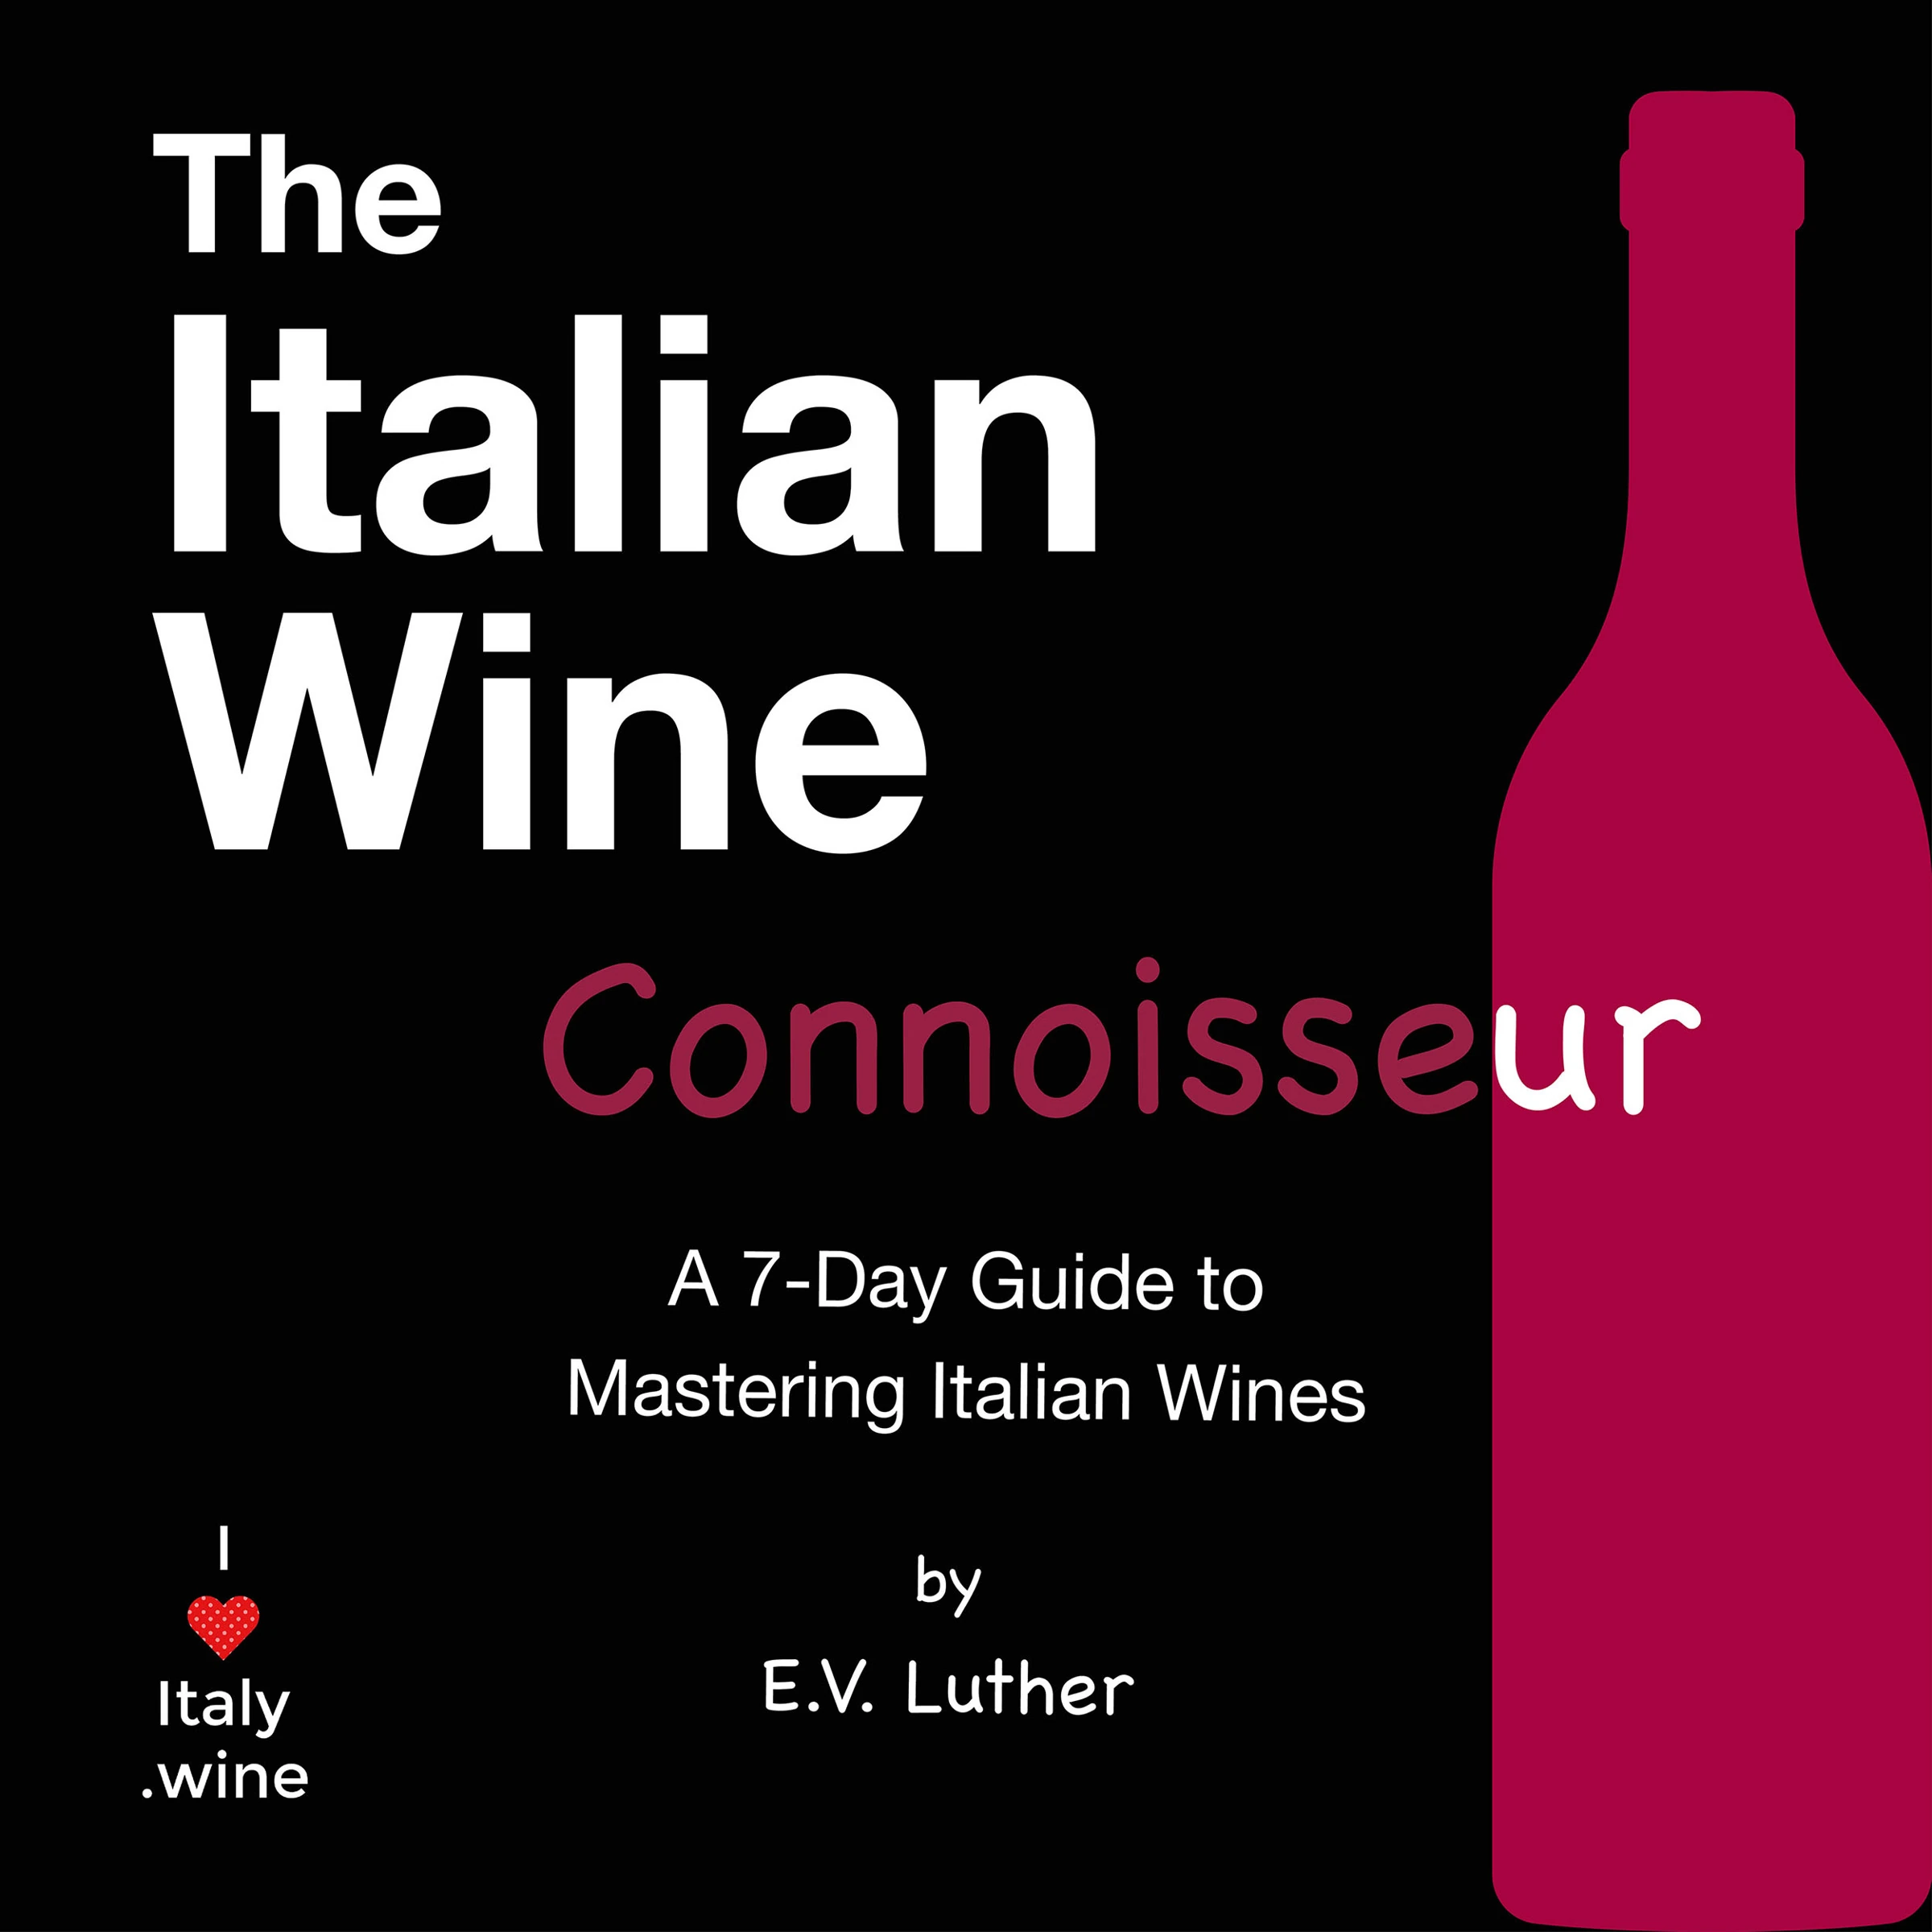 The Italian Wine Connoisseur Audiobook by E.V. Luther